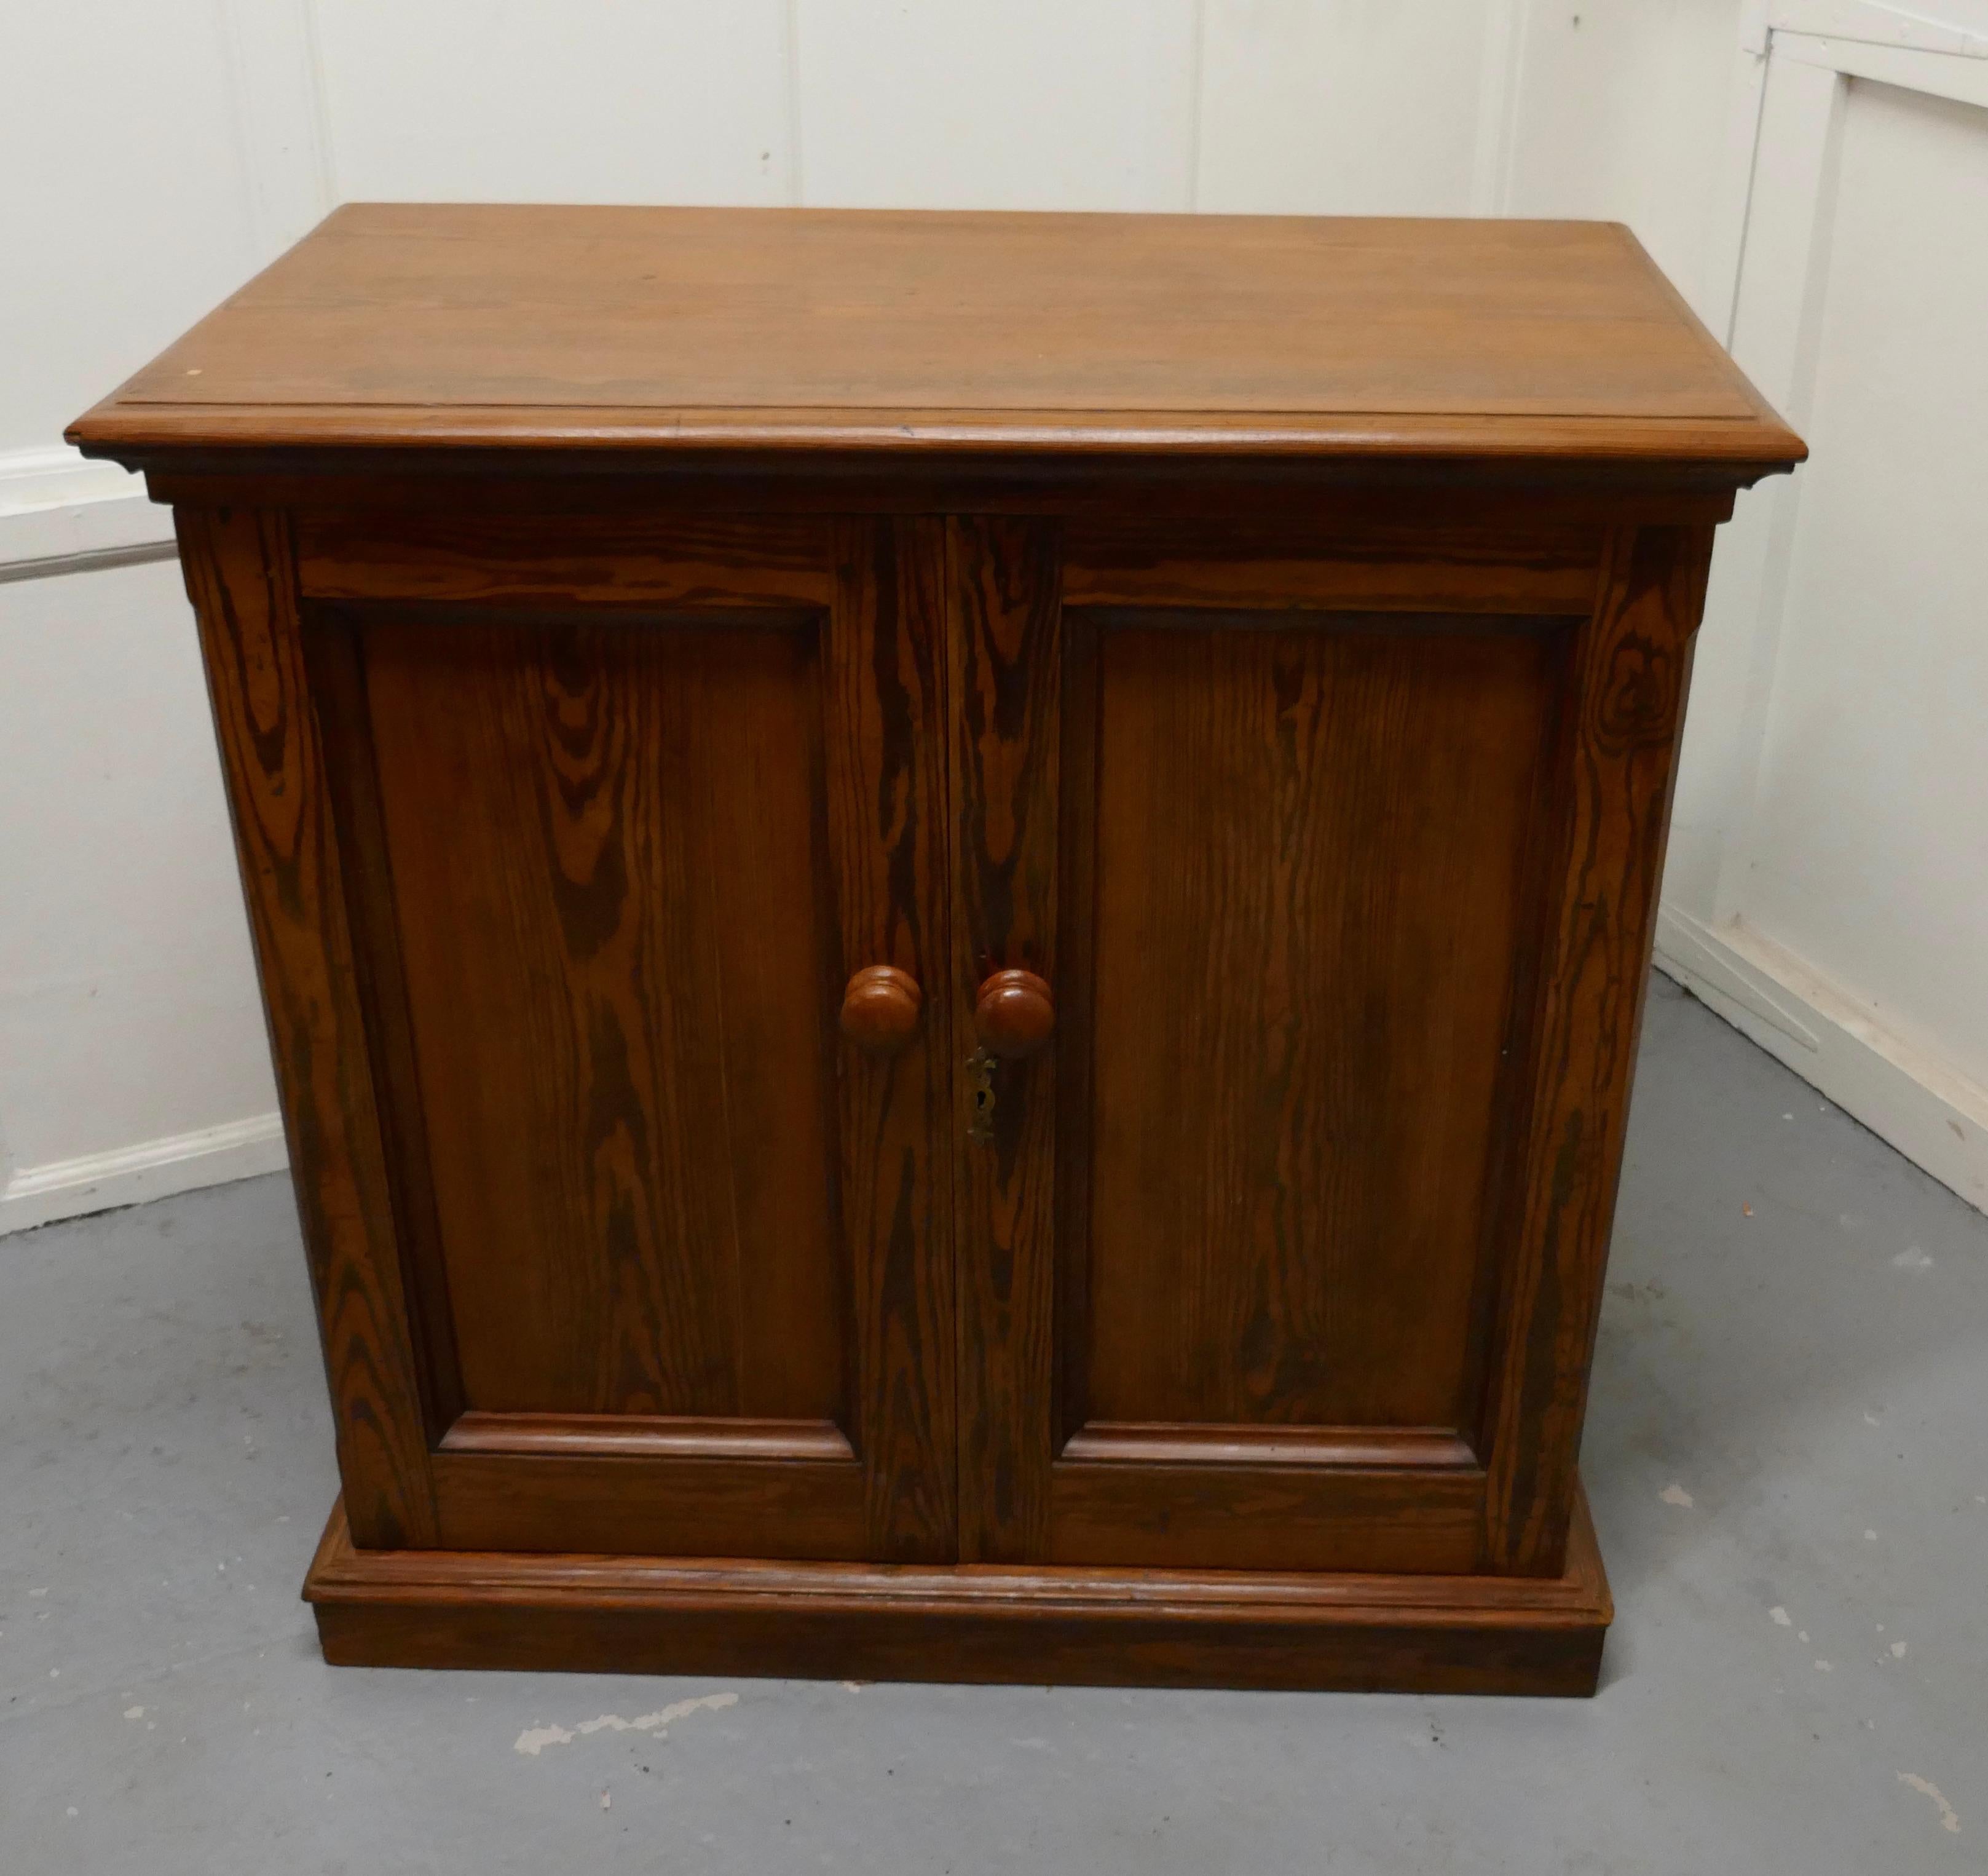 Sturdy 19th century pitch pine 2-door cupboard

This roomy cupboard is made throughout in beautiful pitch pine it has paneled doors, moulded top and it stands on a neat plinth 
 
The cupboard has one adjustable shelf to the inside
The cupboard